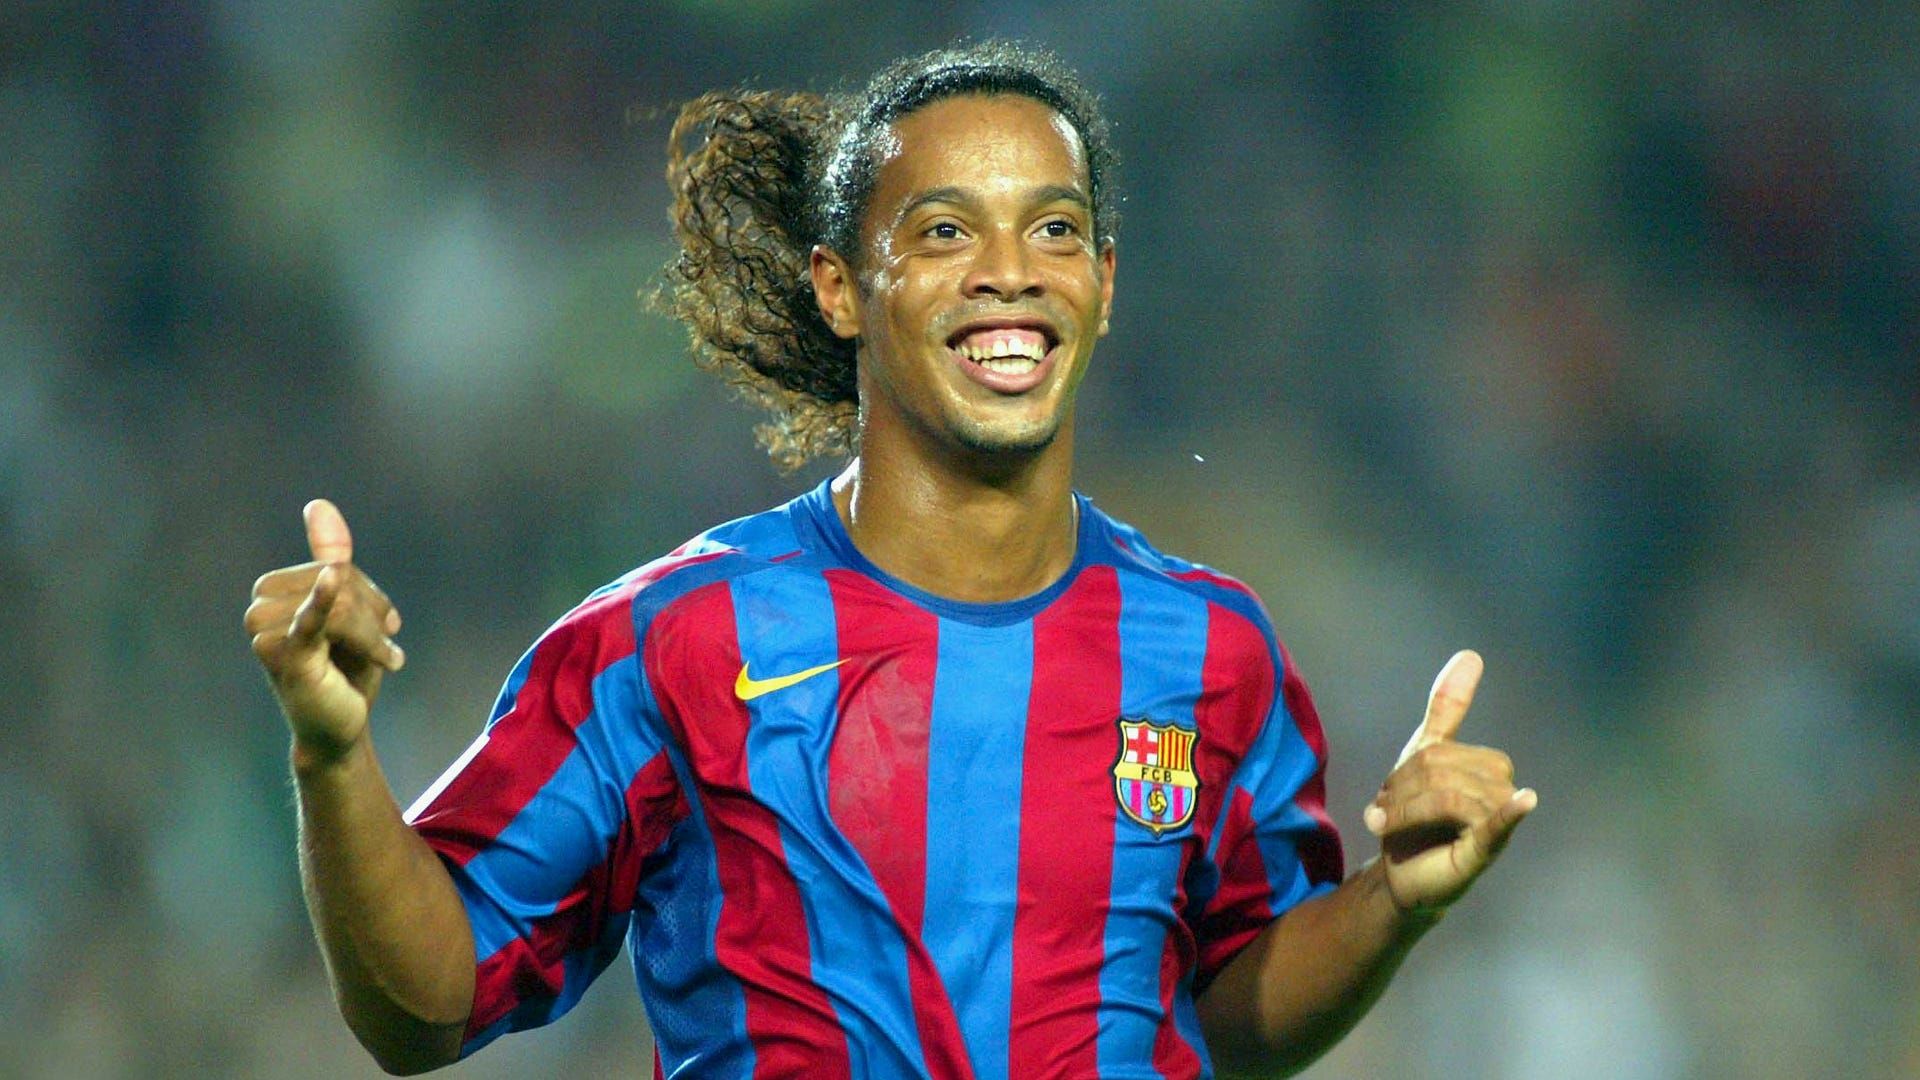 Ronaldinho to play for Porcinos FC in the Spanish Media League